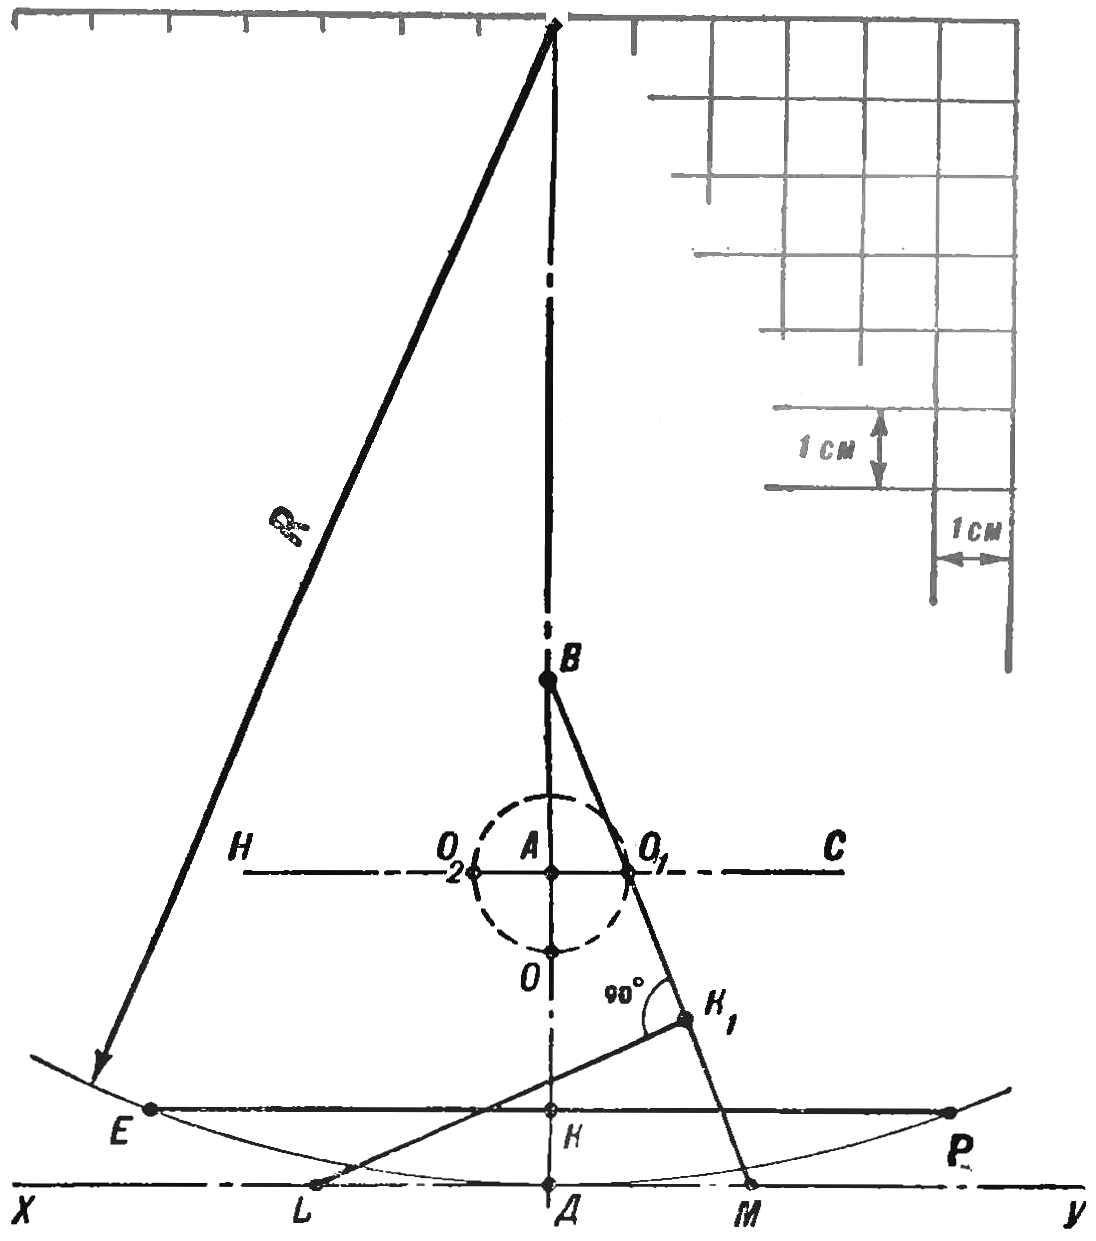 Fig. 3. The geometric construction of an arc to determine the linear dimensions of the sector.